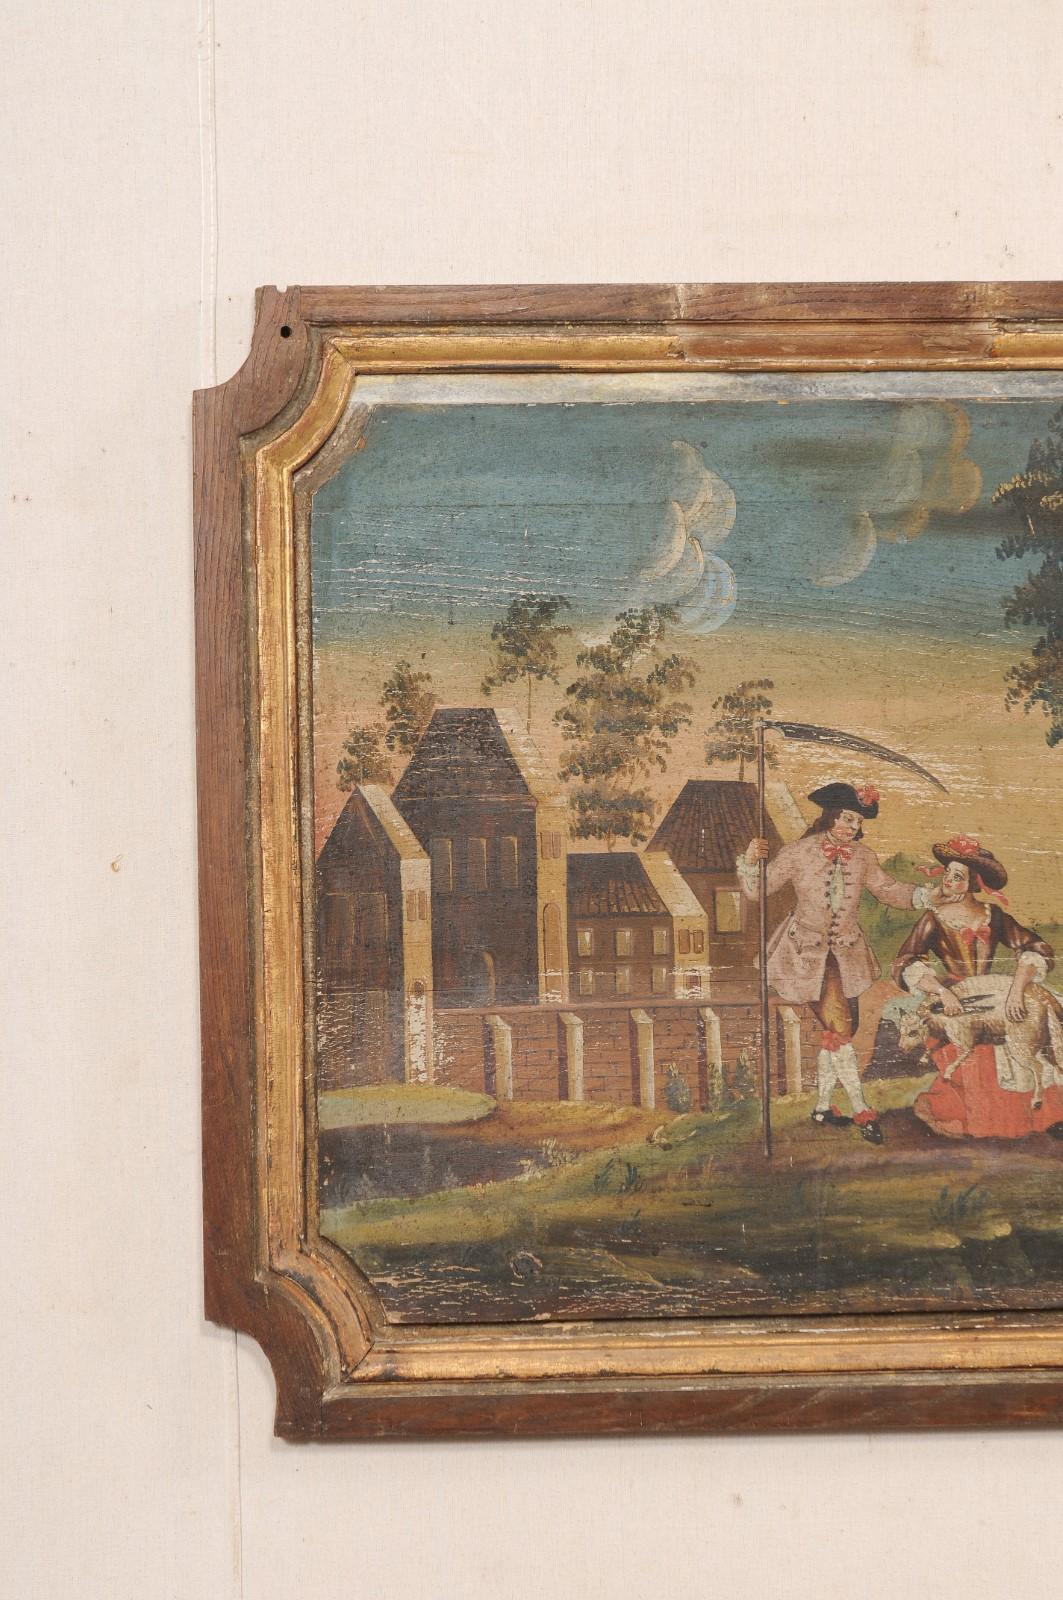 19th C. French Landscape & Figures Painting on Wooden Plaque (4+ Ft Wide) In Good Condition For Sale In Atlanta, GA